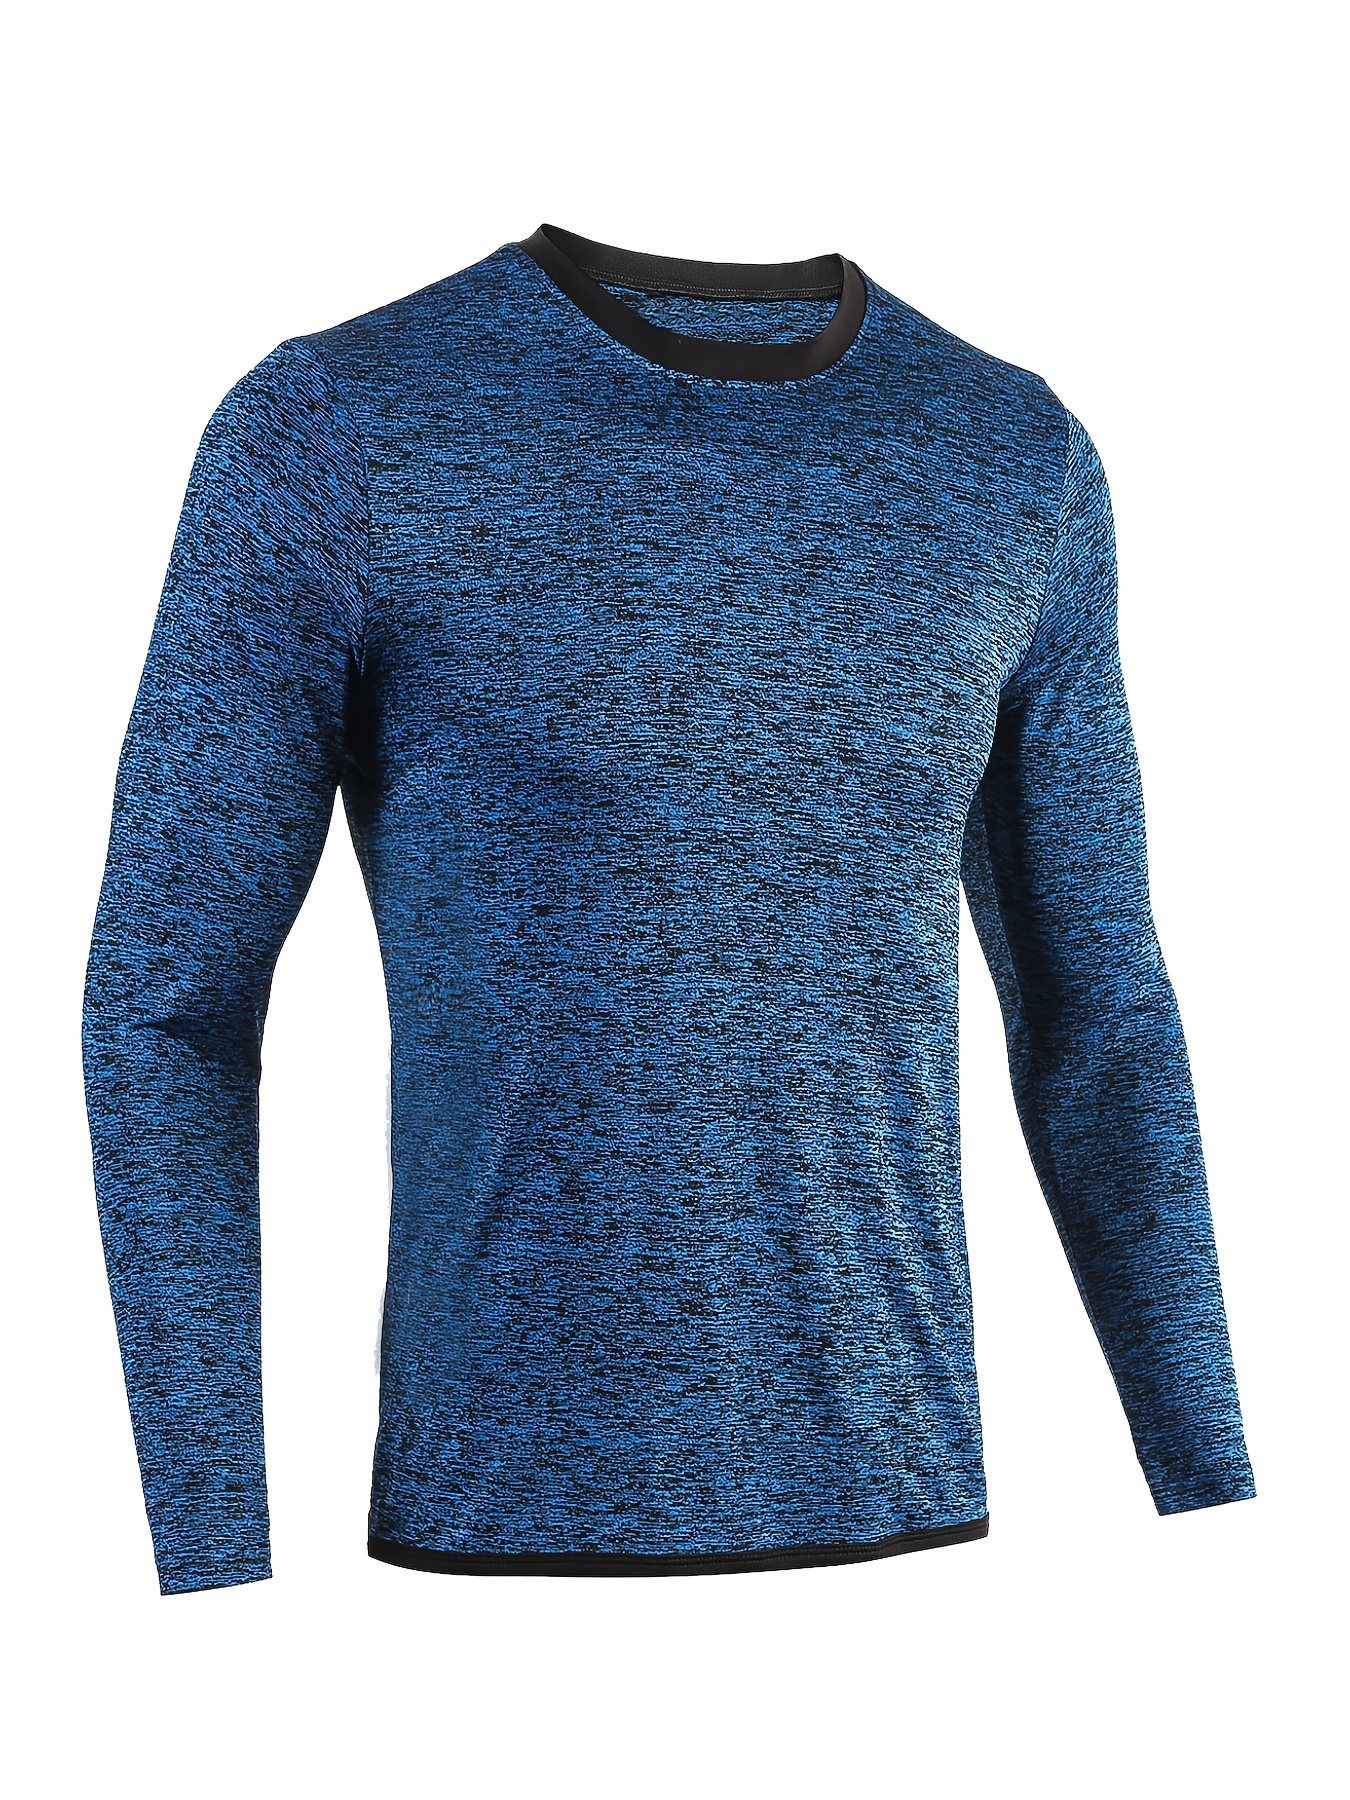 Breathable Compression Long Sleeve Sports Shirt for Men - Quick Drying Crew  Neck Athletic Wear for Basketball, Football, Running, and Fitness